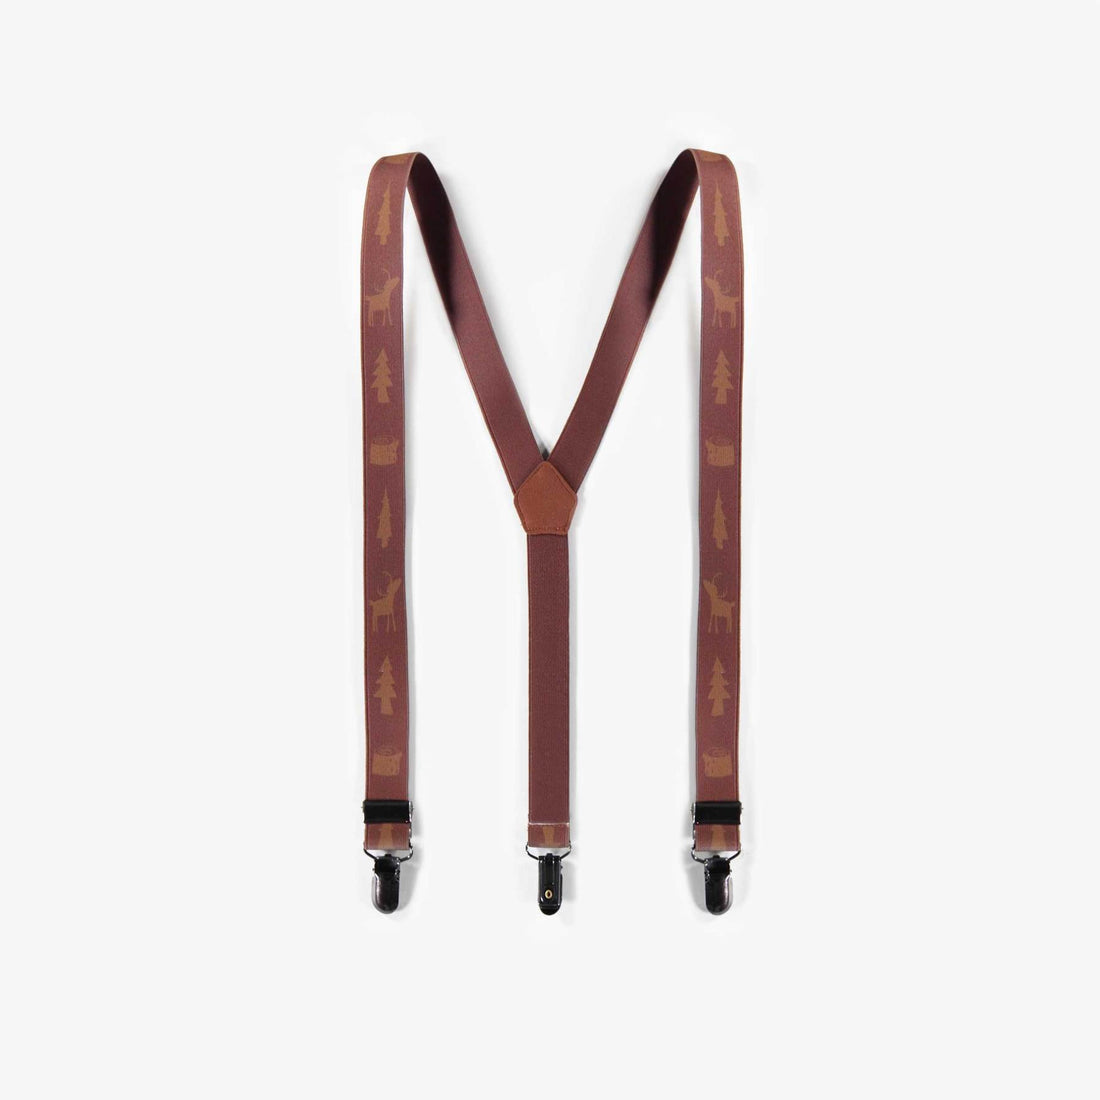 BROWN PATTERNED SUSPENDERS, CHILD